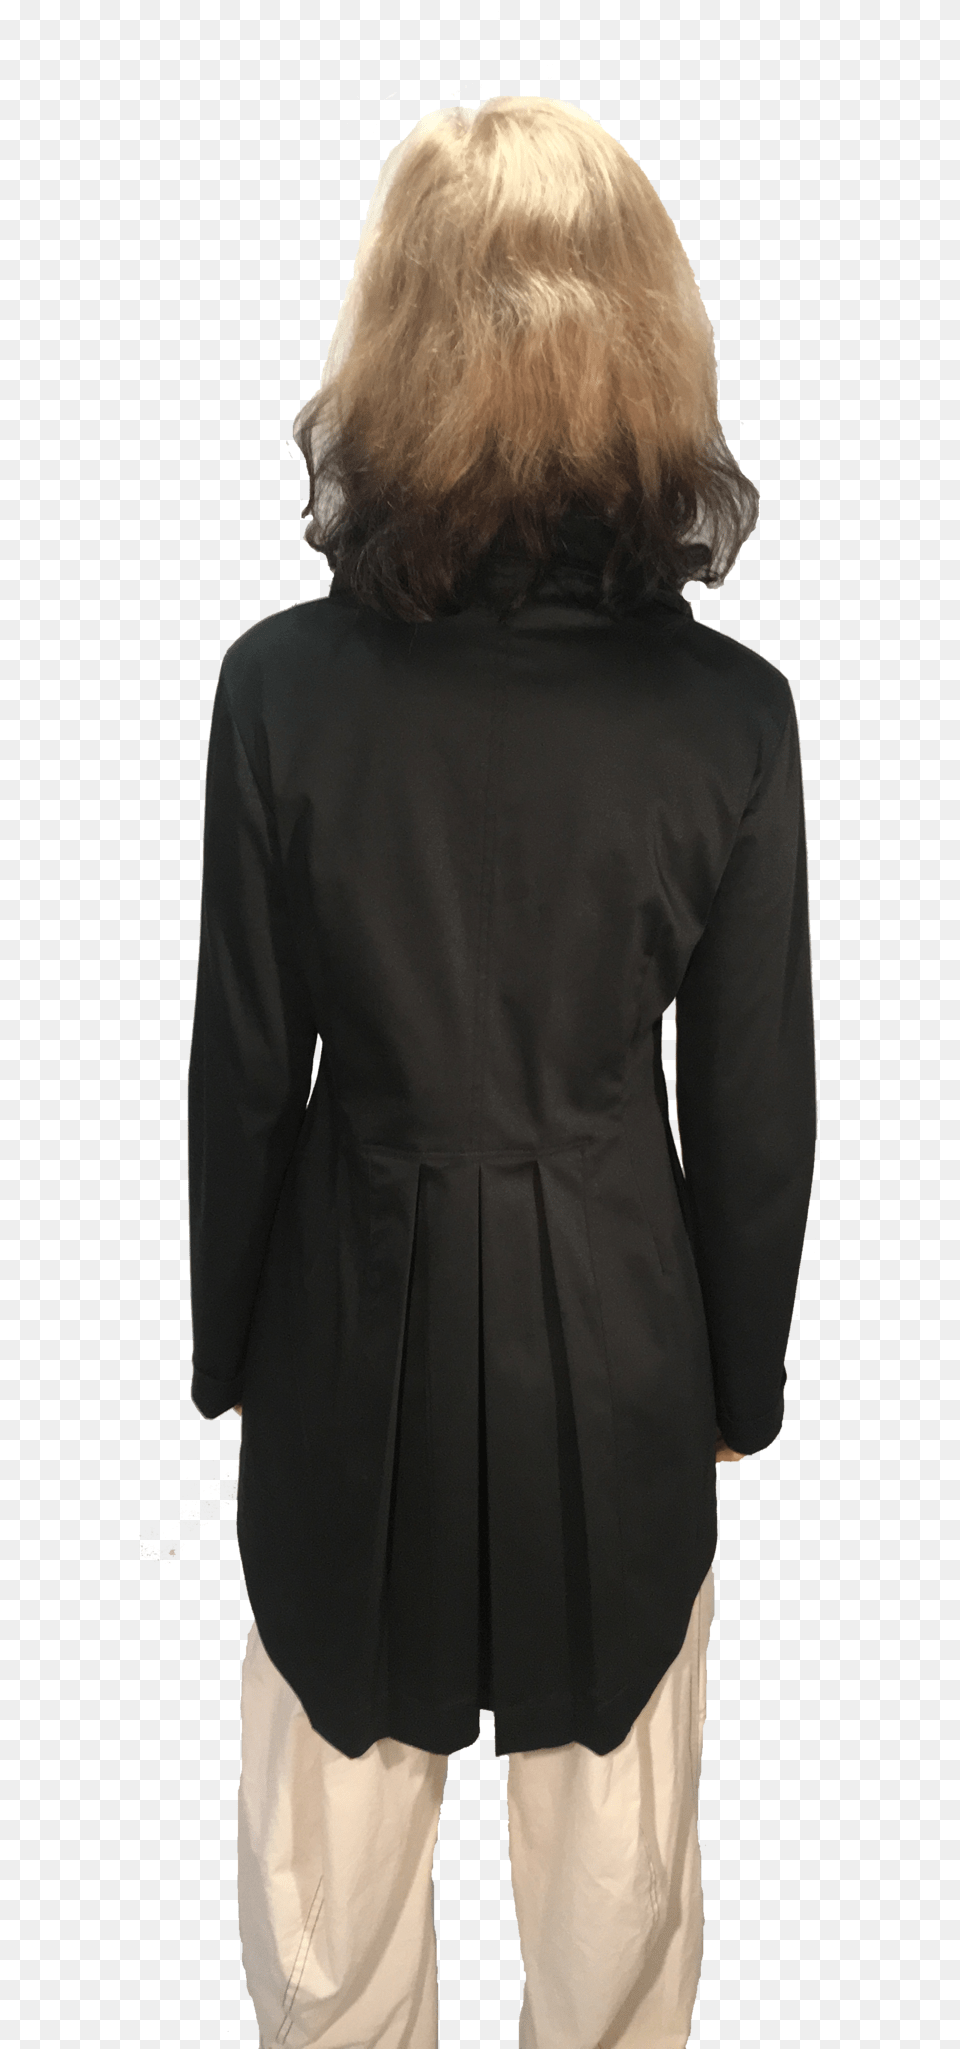 Twisted Sister I Washed Cotton Muslin Girl, Clothing, Coat, Jacket, Adult Png